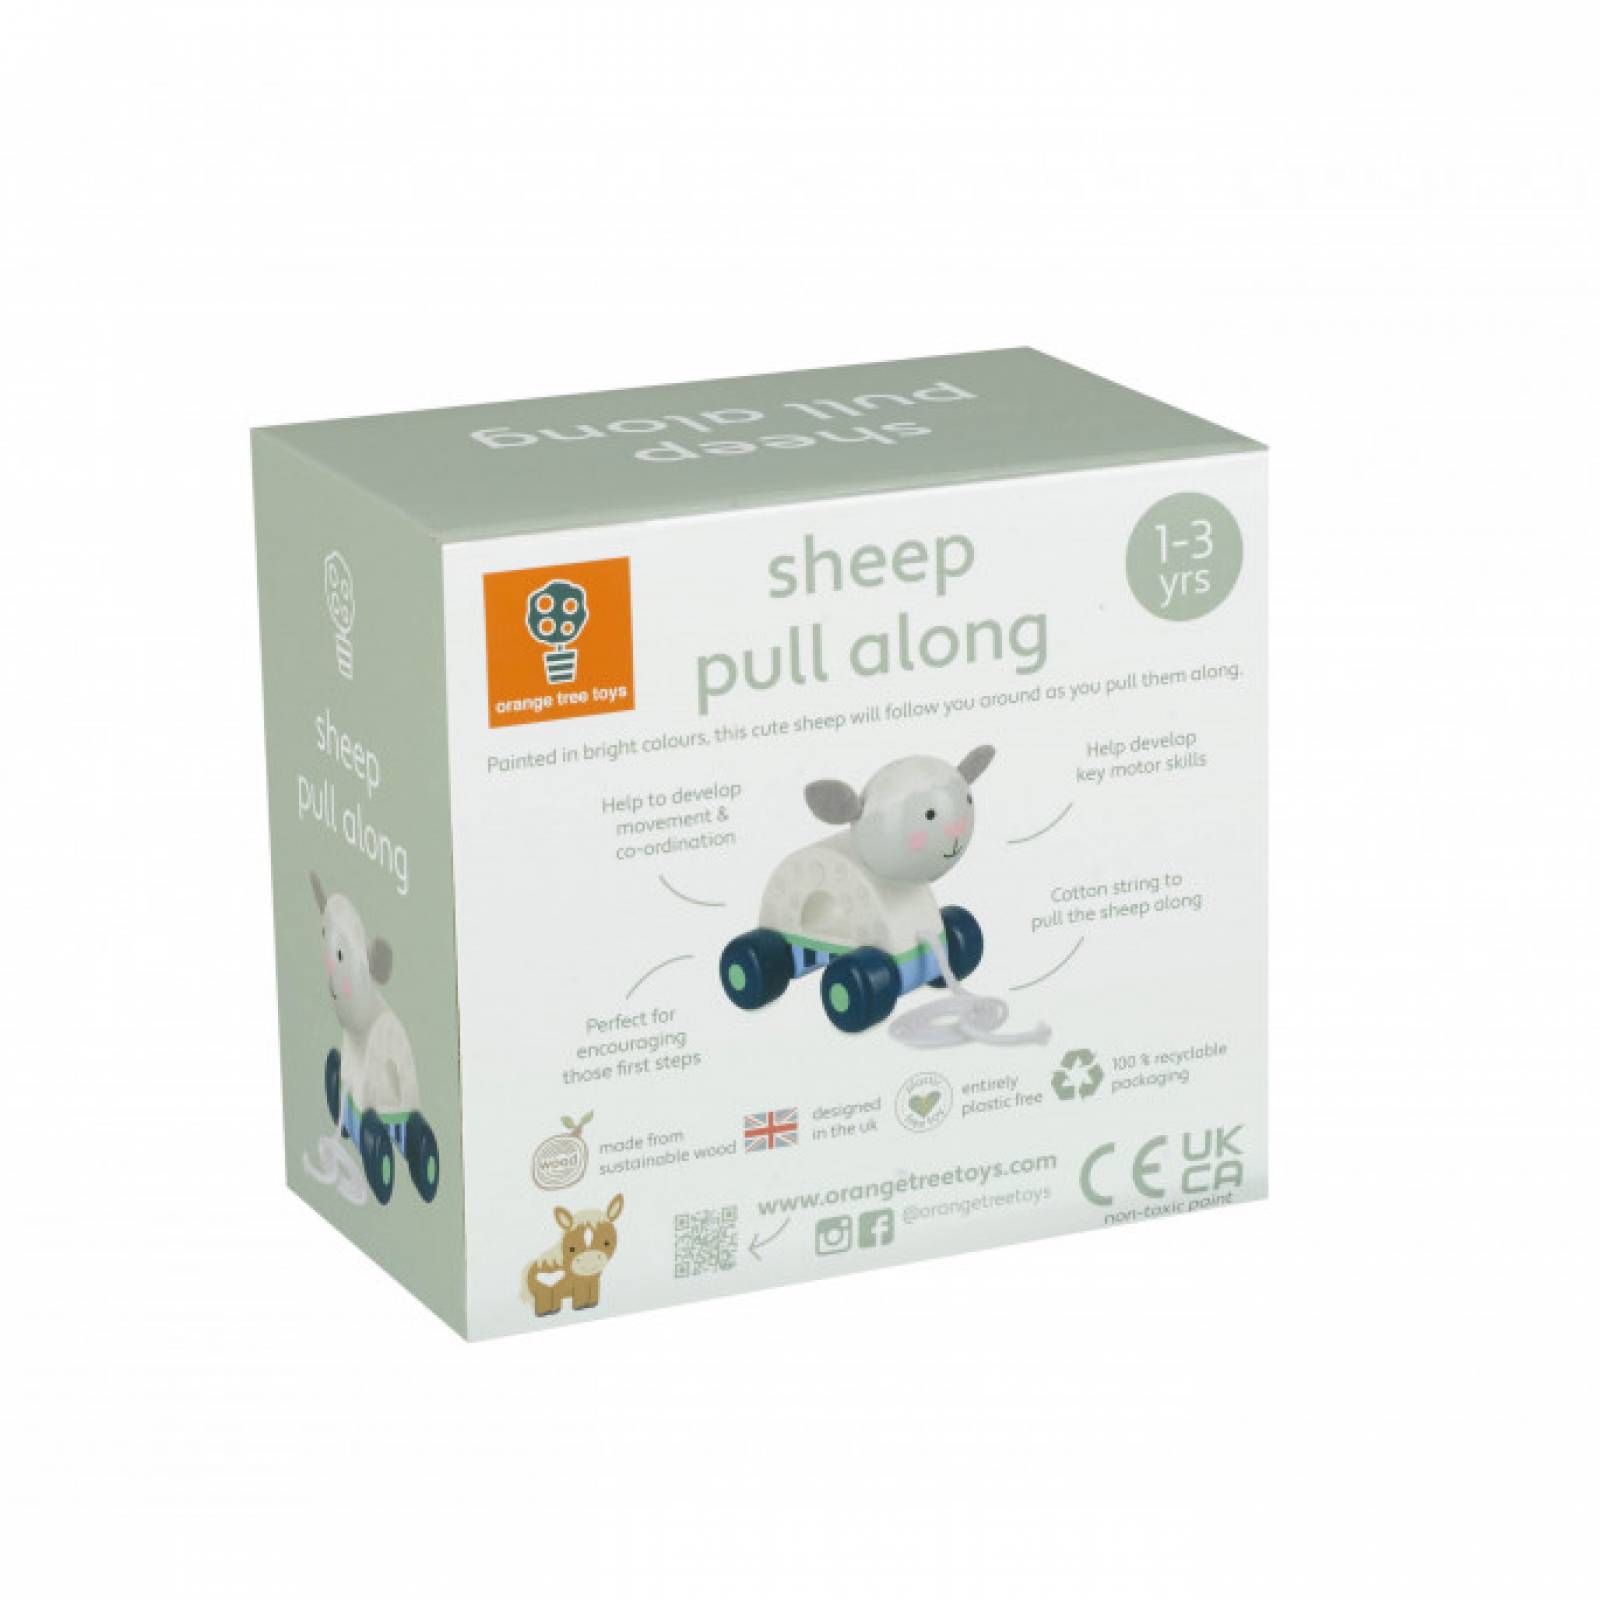 Wooden Sheep Pull Along Toy By Orange Tree 1+ thumbnails